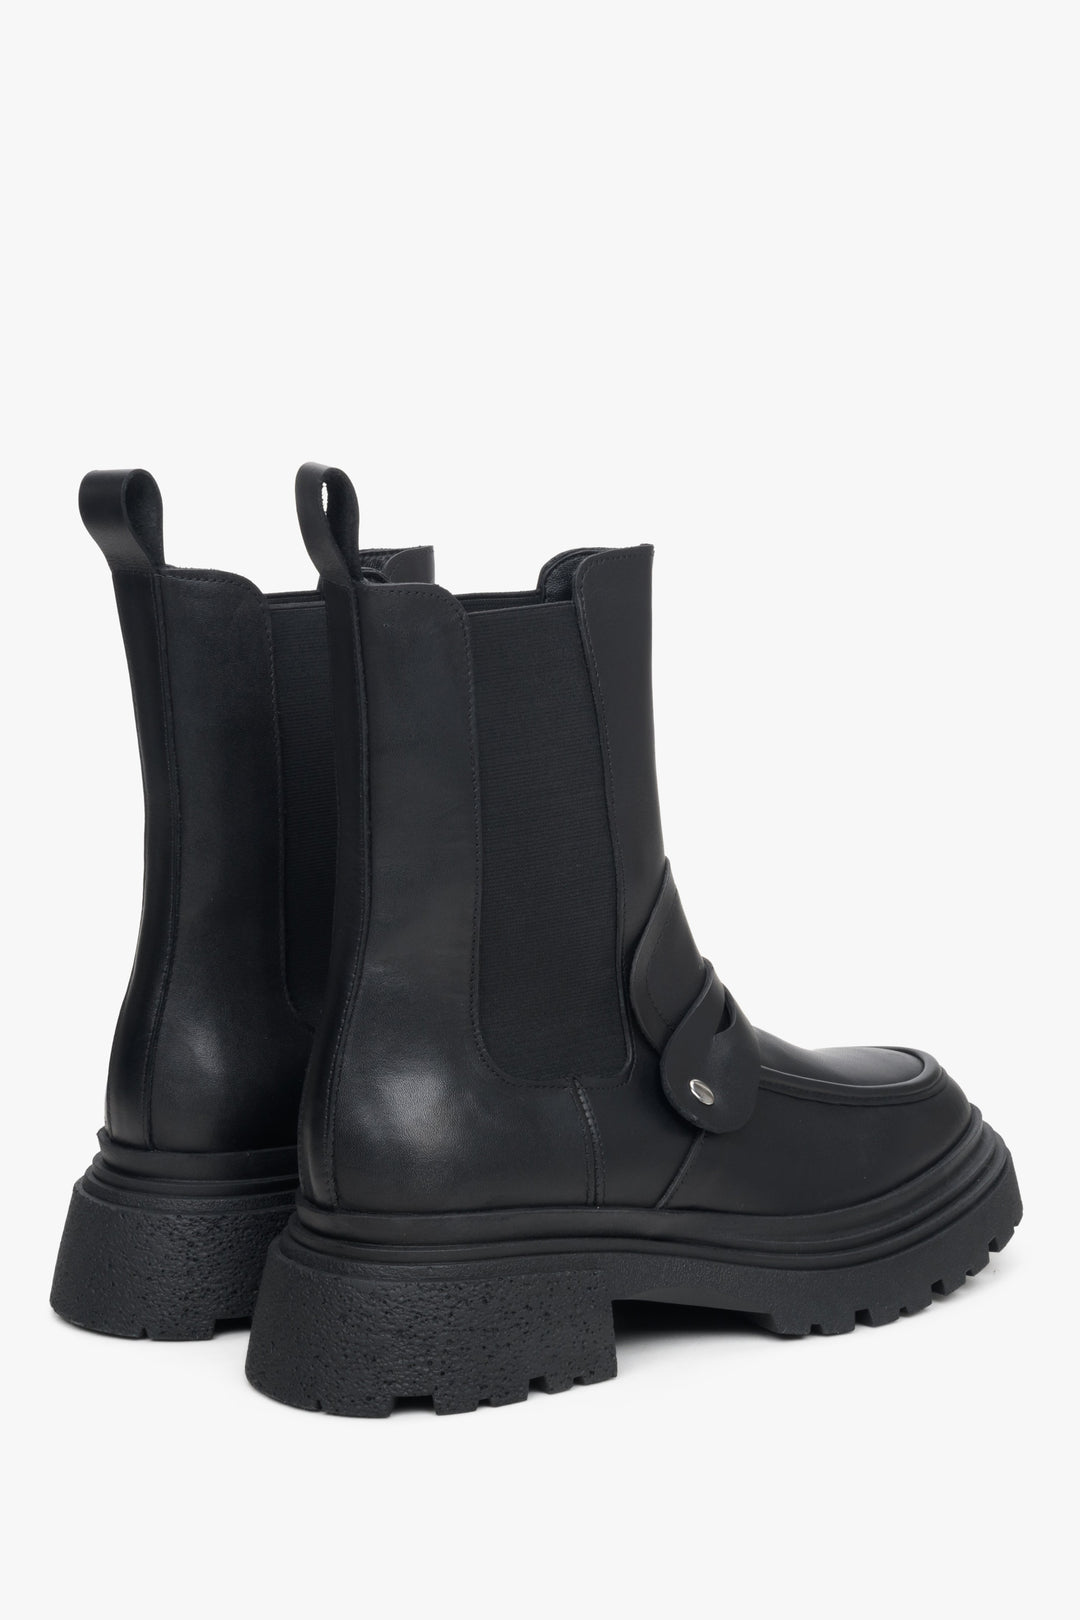 Women's black leather Chelsea boots with ornament by Estro - close-up on the heel and side line.